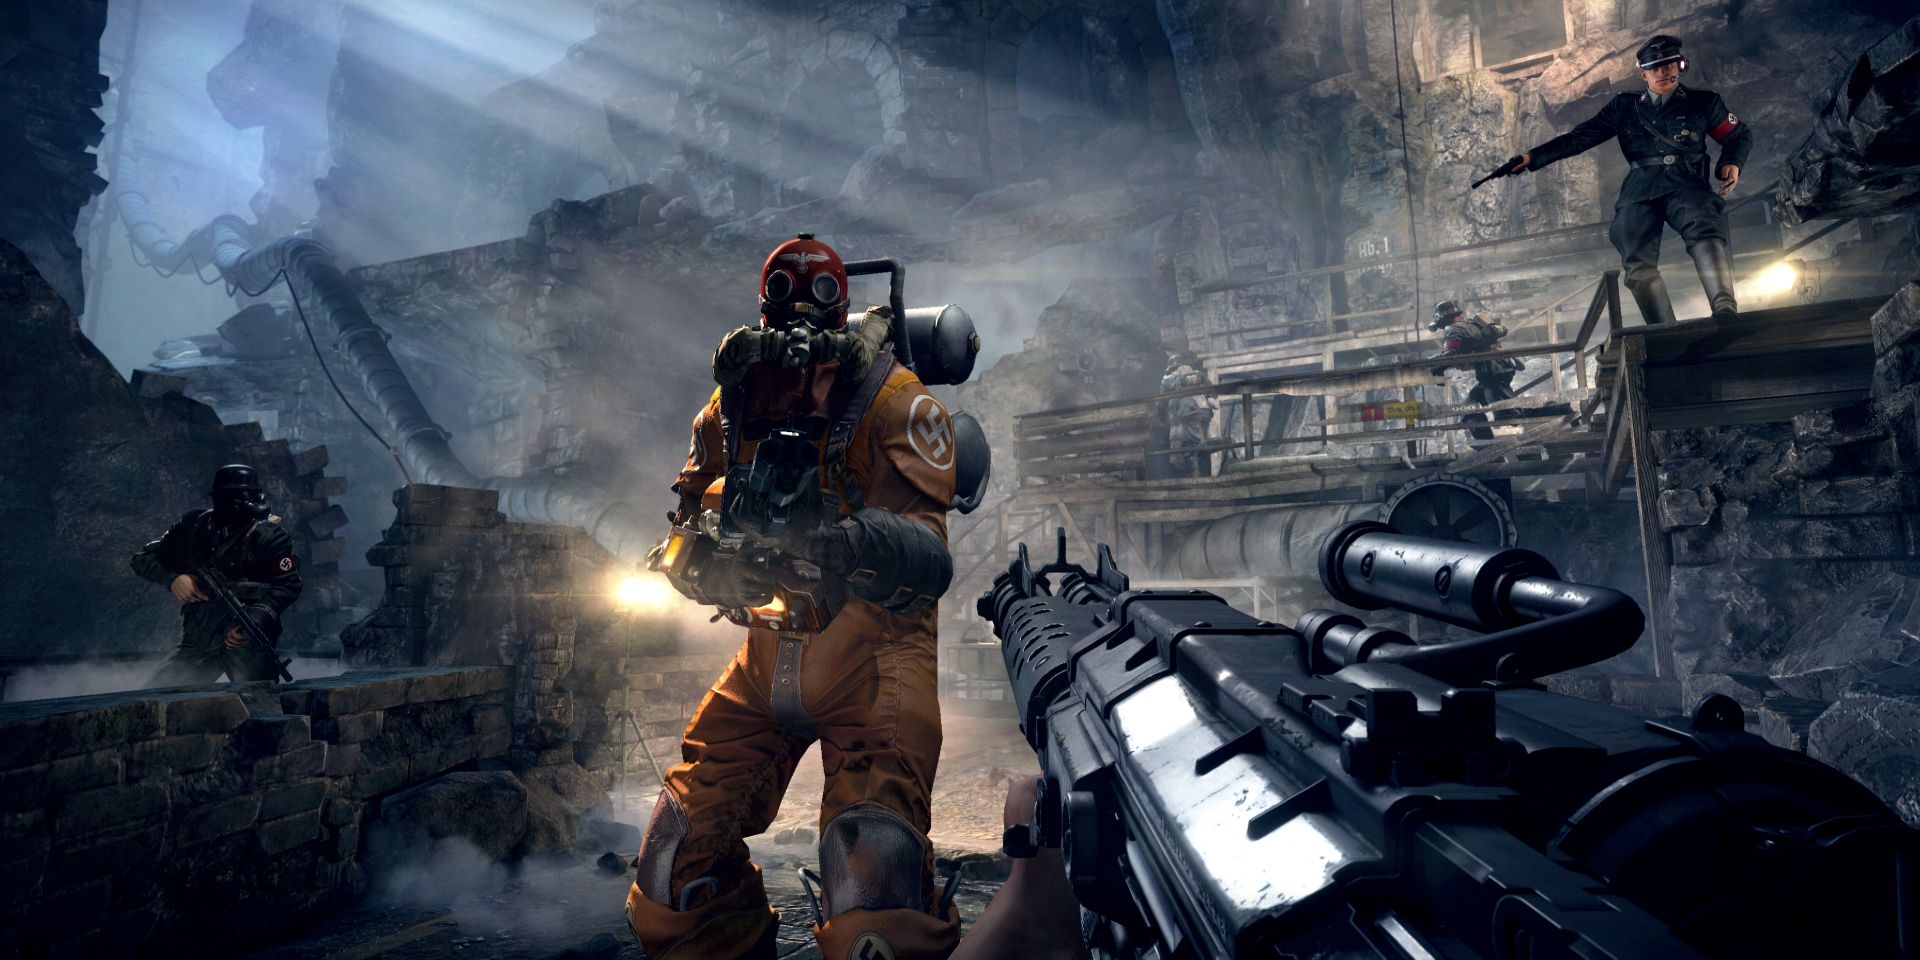 A promotional image from the 2015 first-person shooter Wolfenstein: The Old Blood.